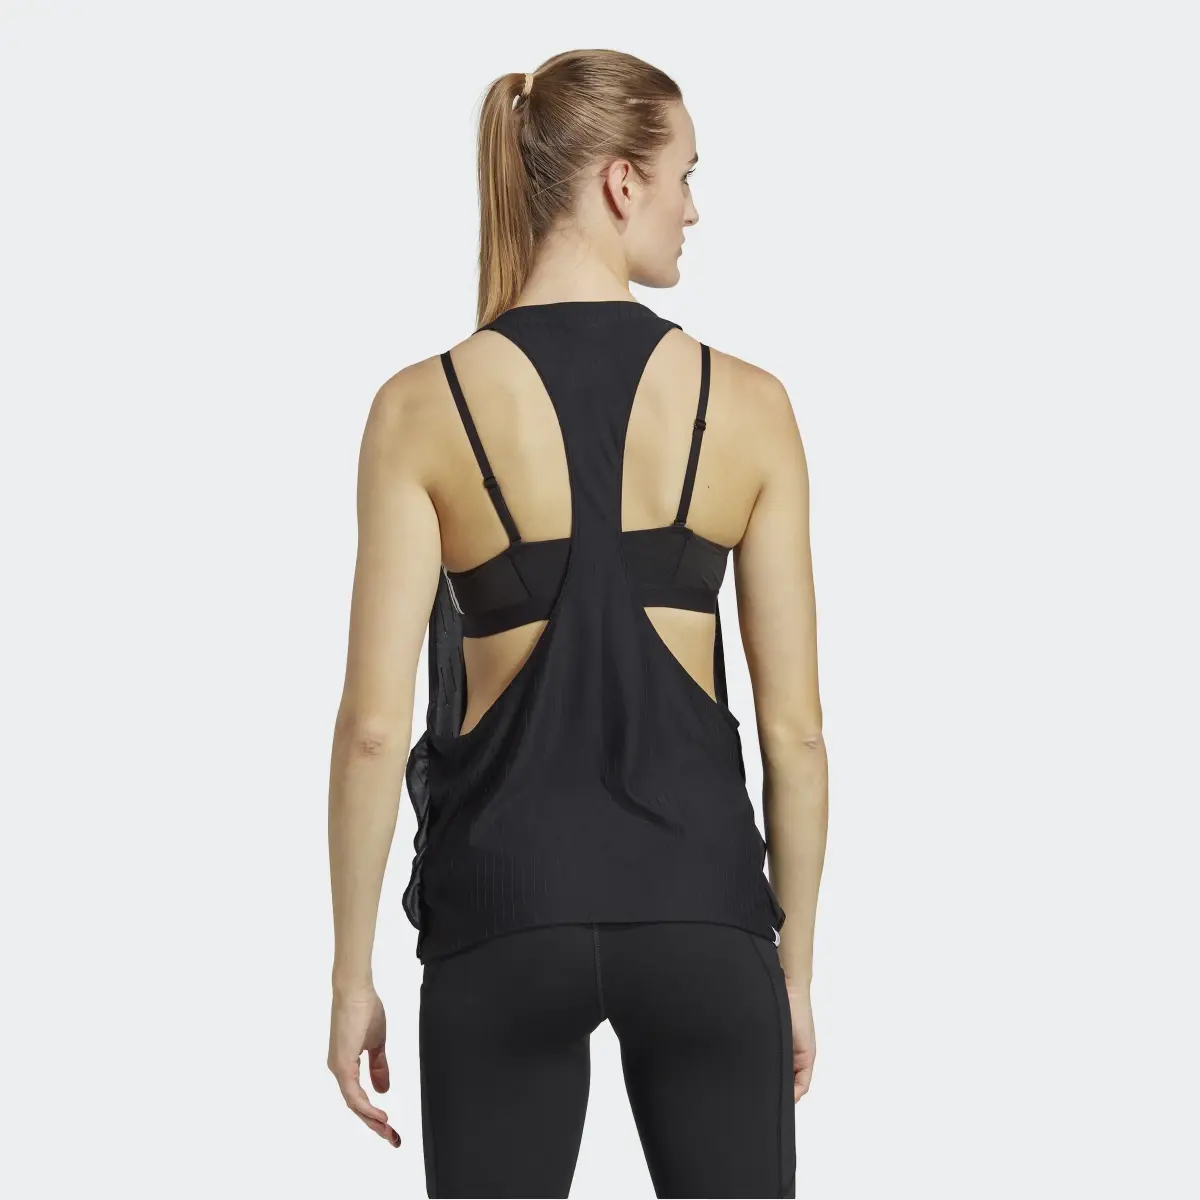 Adidas Made to be Remade Running Tank Top. 3